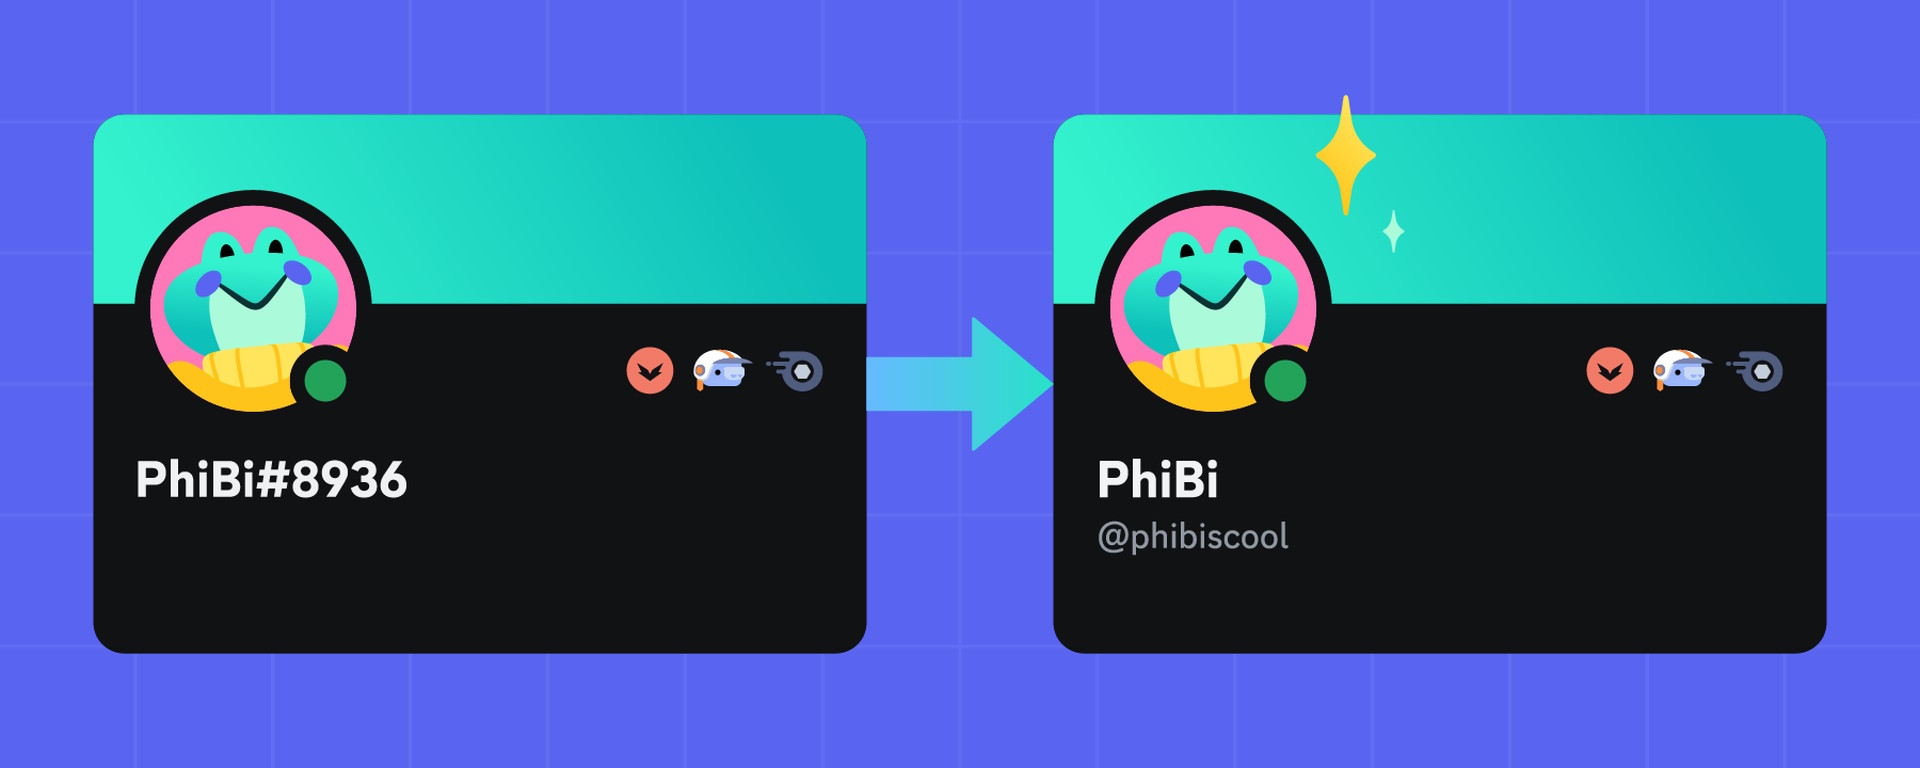 Brace yourself: Discord is going to make everyone pick a new username